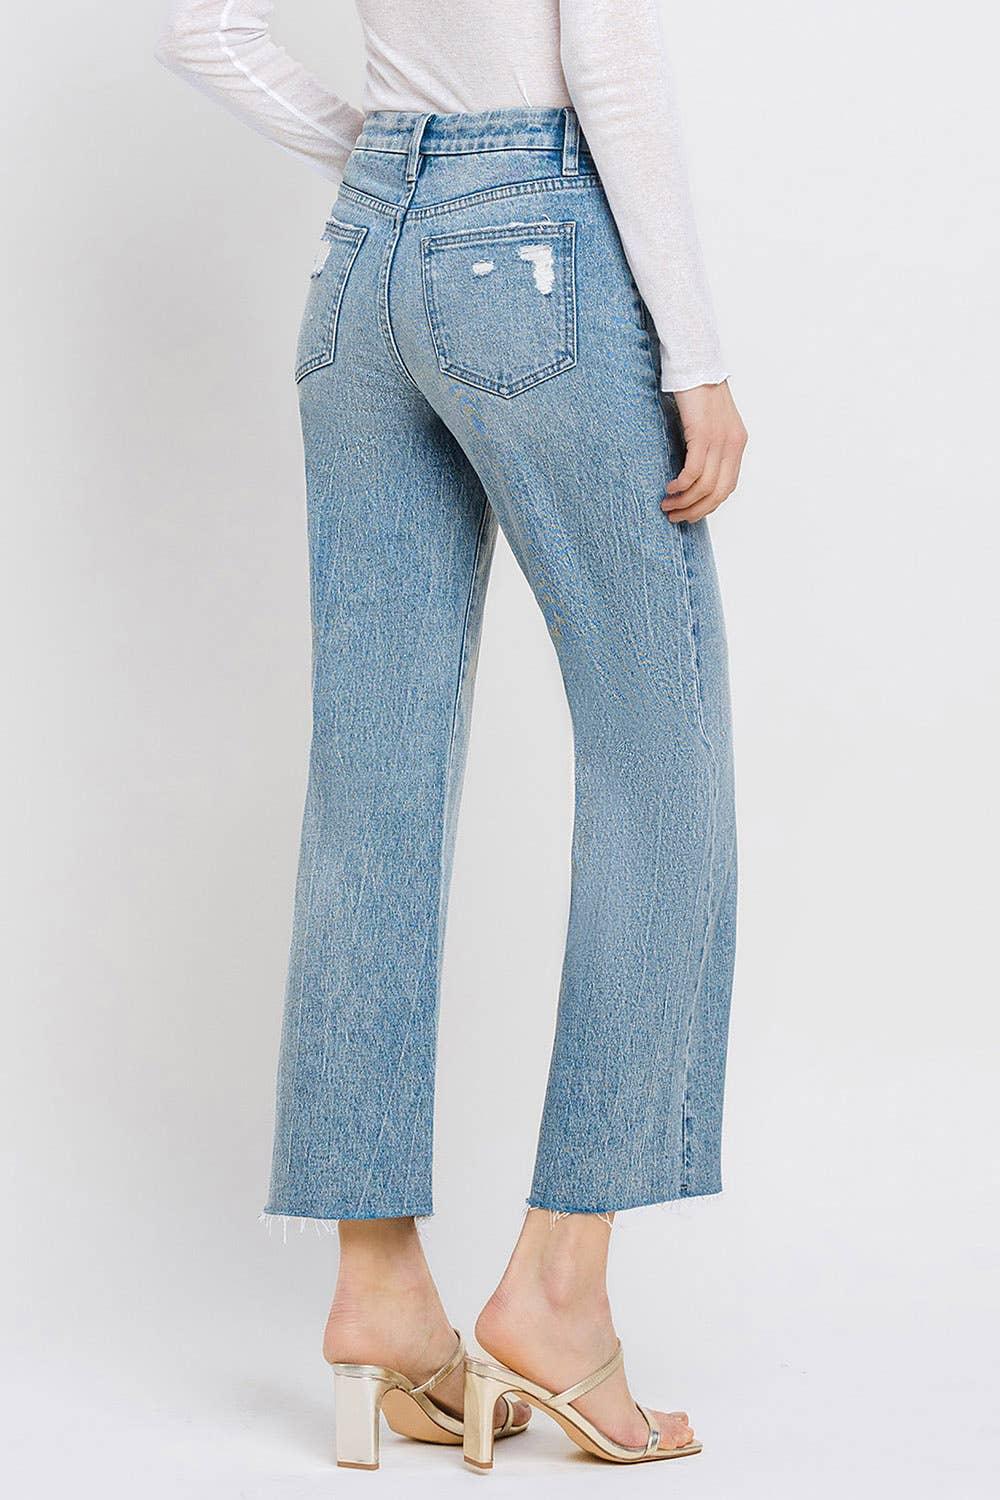 Olivia Ankle Wide Leg Jeans - Strawberry Moon Boutique